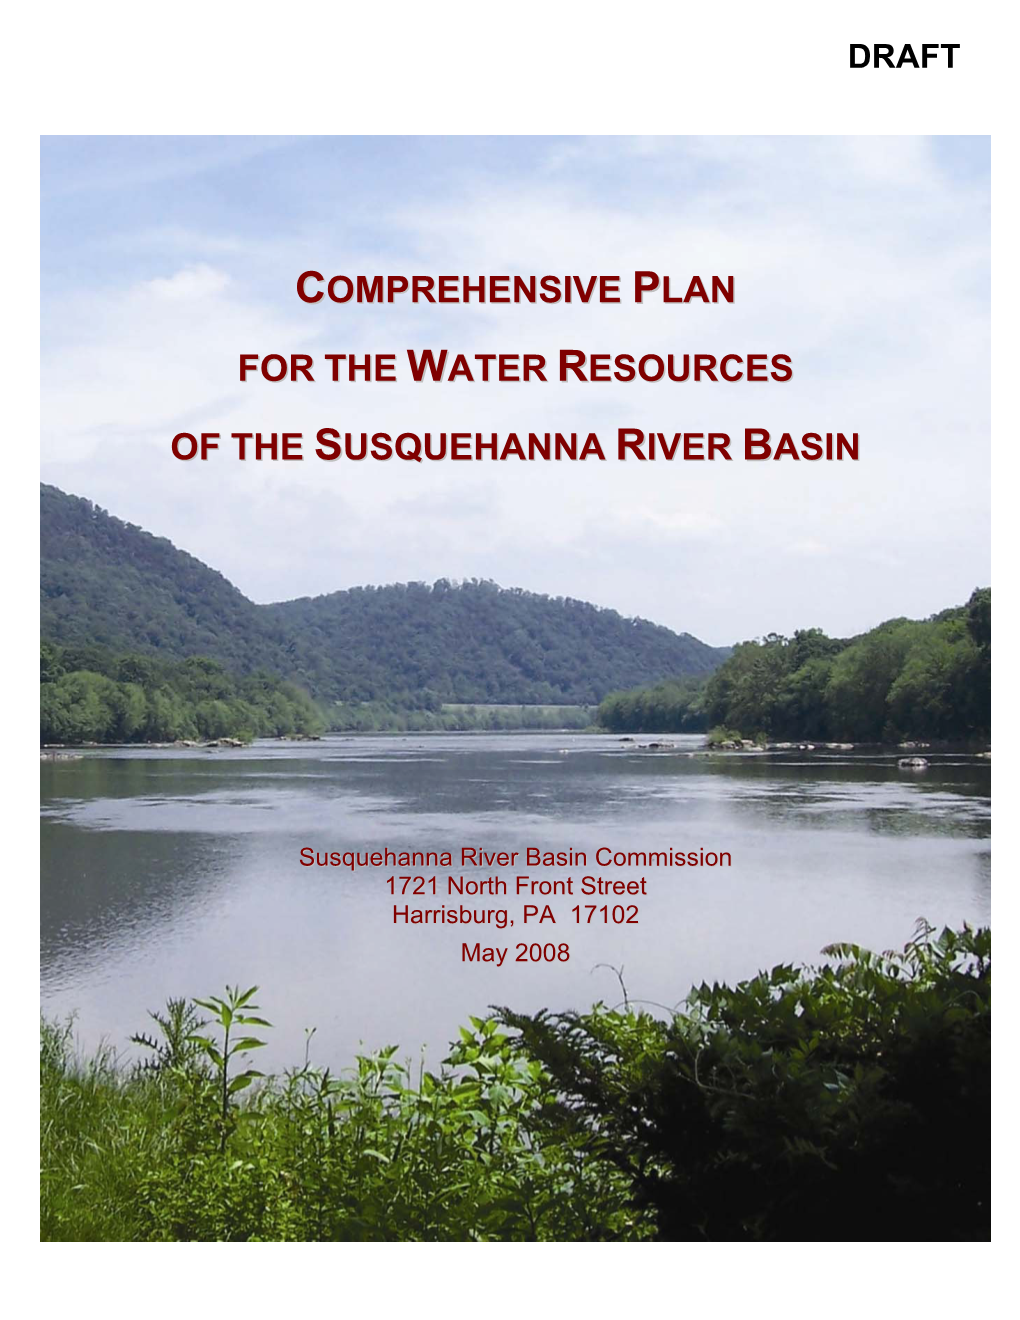 Comprehensive Plan for the Water Resources of the Susquehanna River Basin, Draft